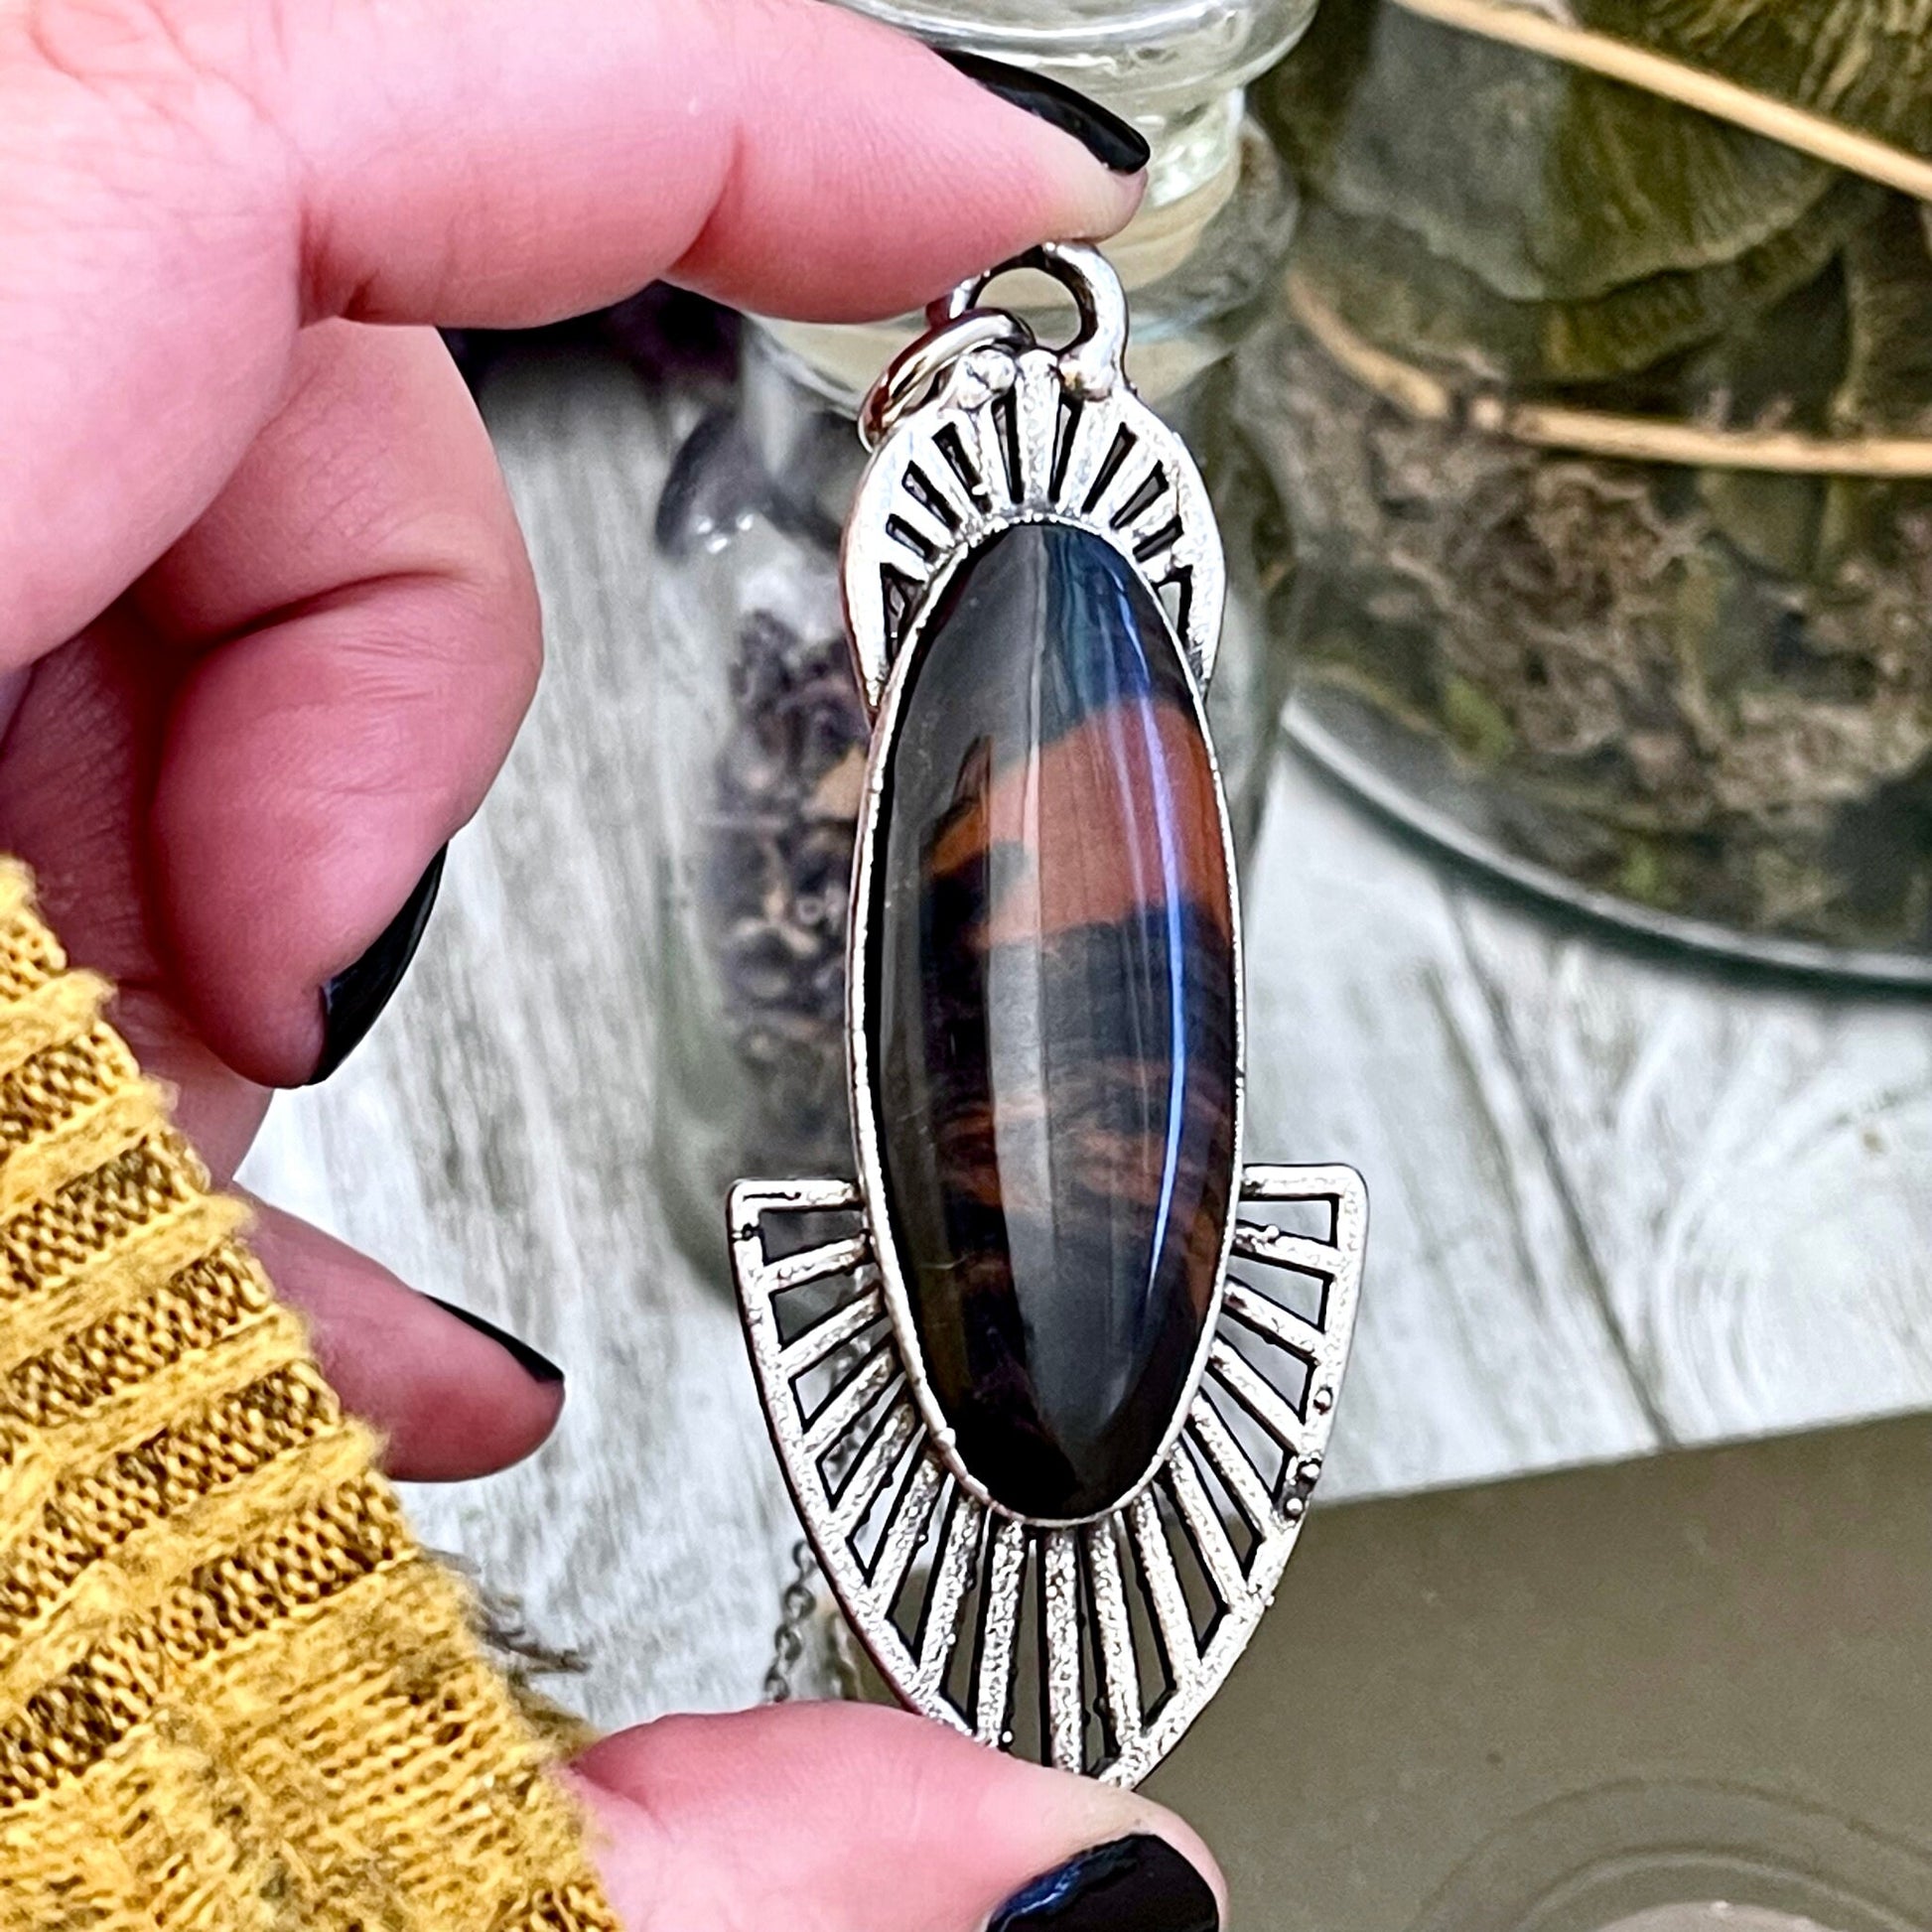 Big Crystal Necklace, Big Stone Necklace, Bohemian Jewelry, Crystal Necklaces, Etsy ID: 1330160167, Foxlark Alchemy, FOXLARK- NECKLACES, Jewelry, Large Crystal, Large Raw Crystal, layering necklace, Necklaces, Raw crystal jewelry, raw crystal necklace, Ra